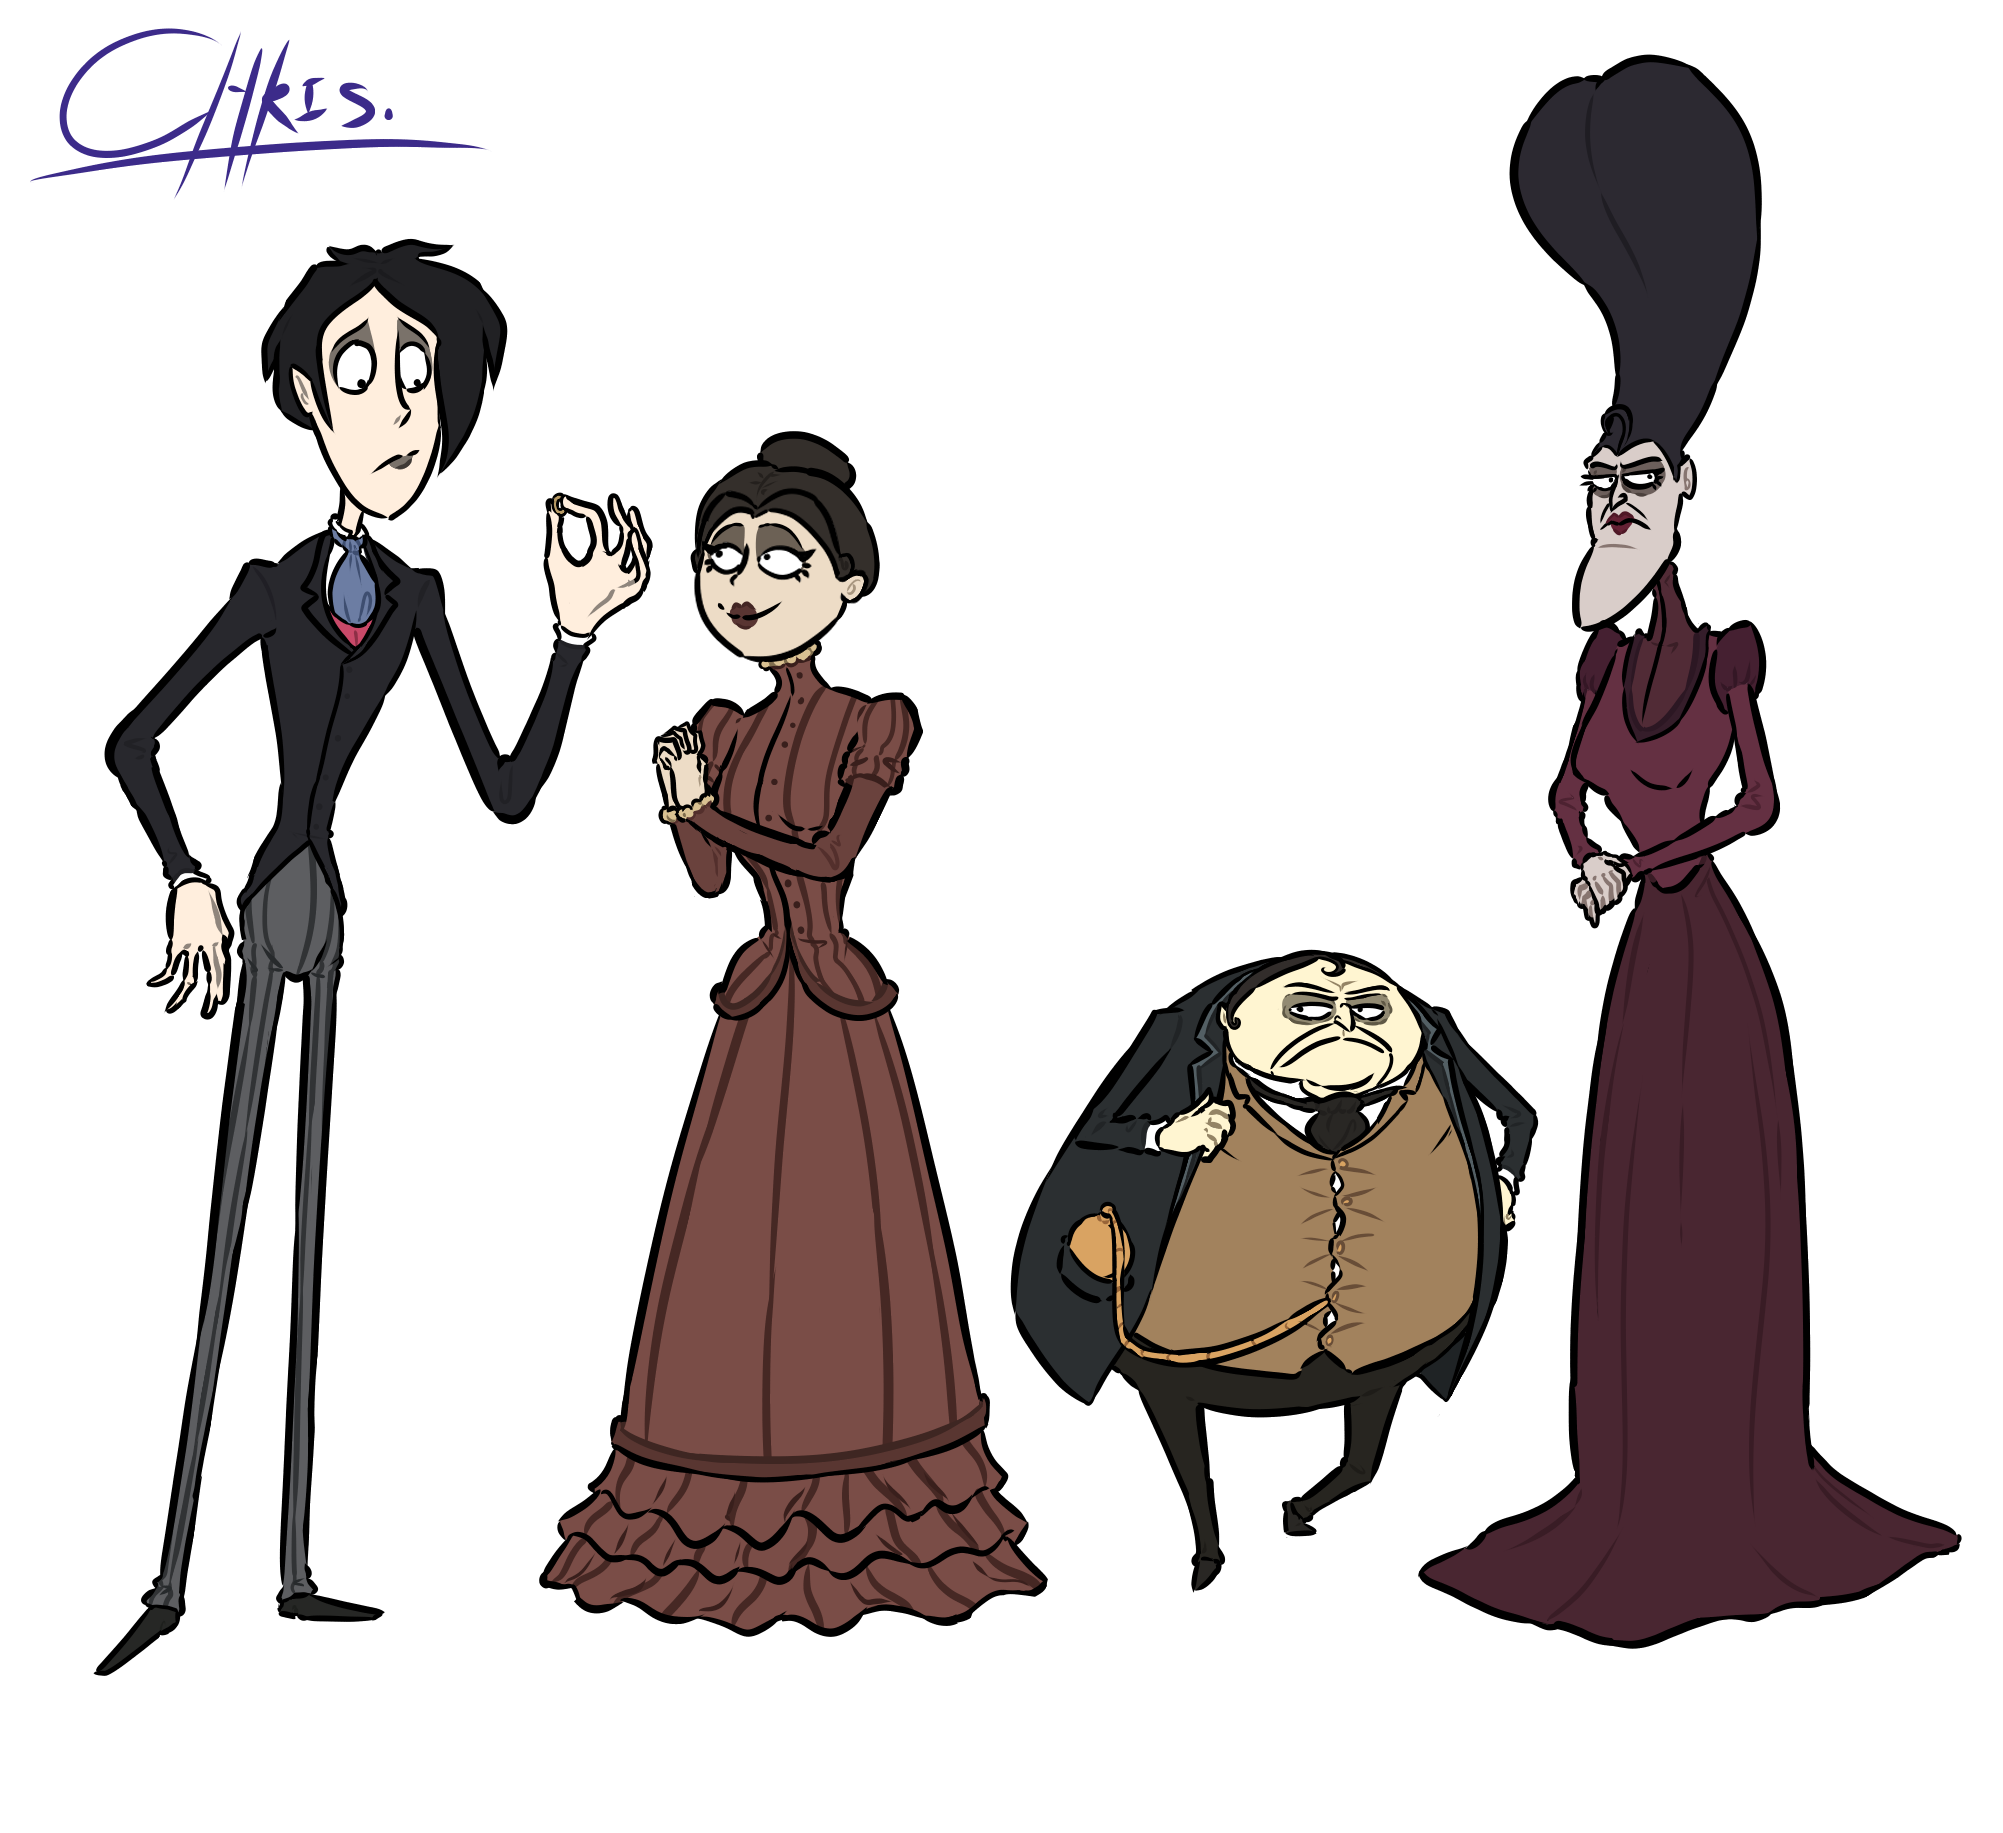 Redesign Of The Corpse Bride Characters By Hrystina On Deviantart